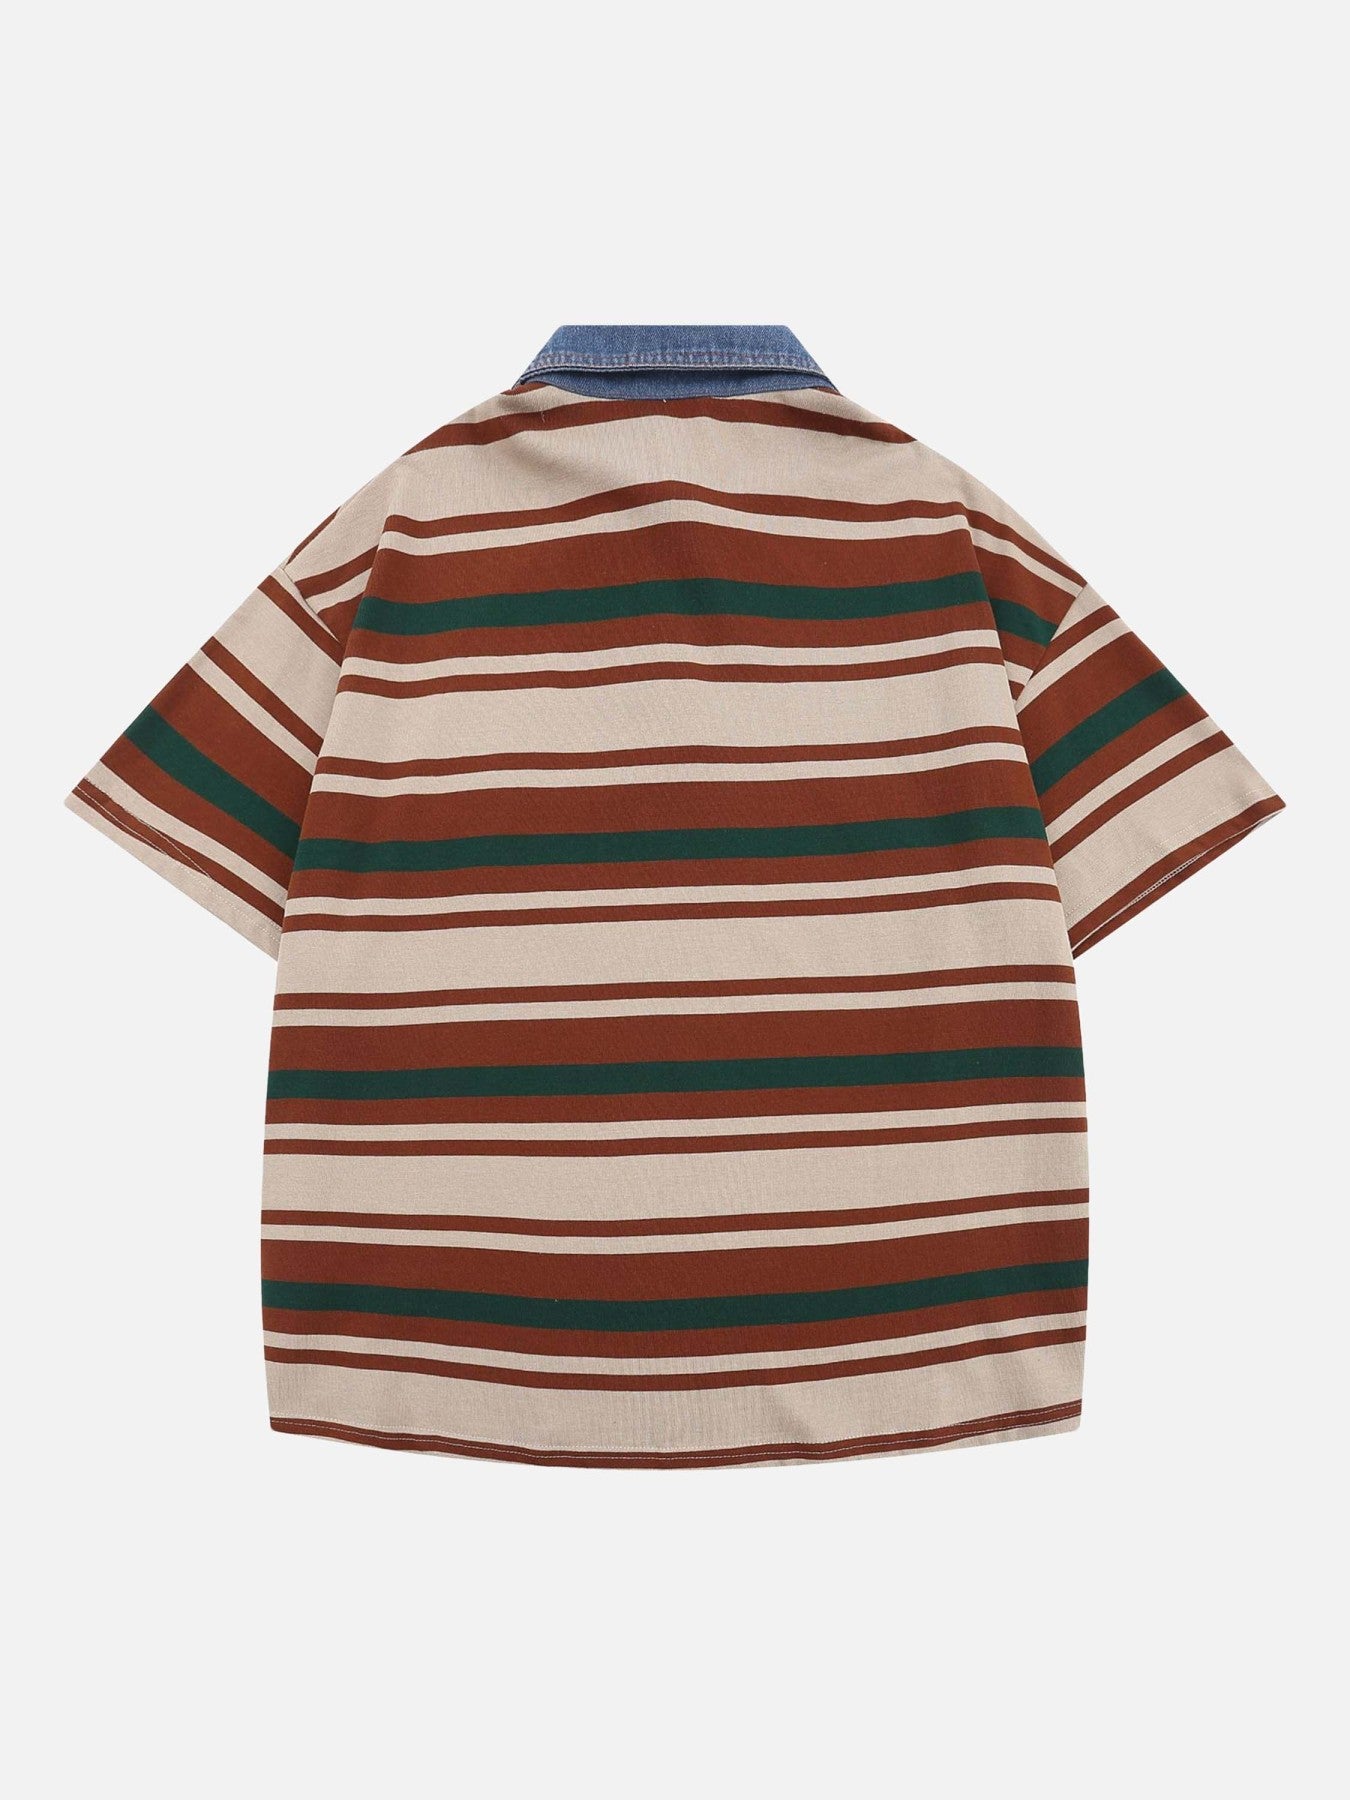 The Supermade Vintage Striped Polo Shirt